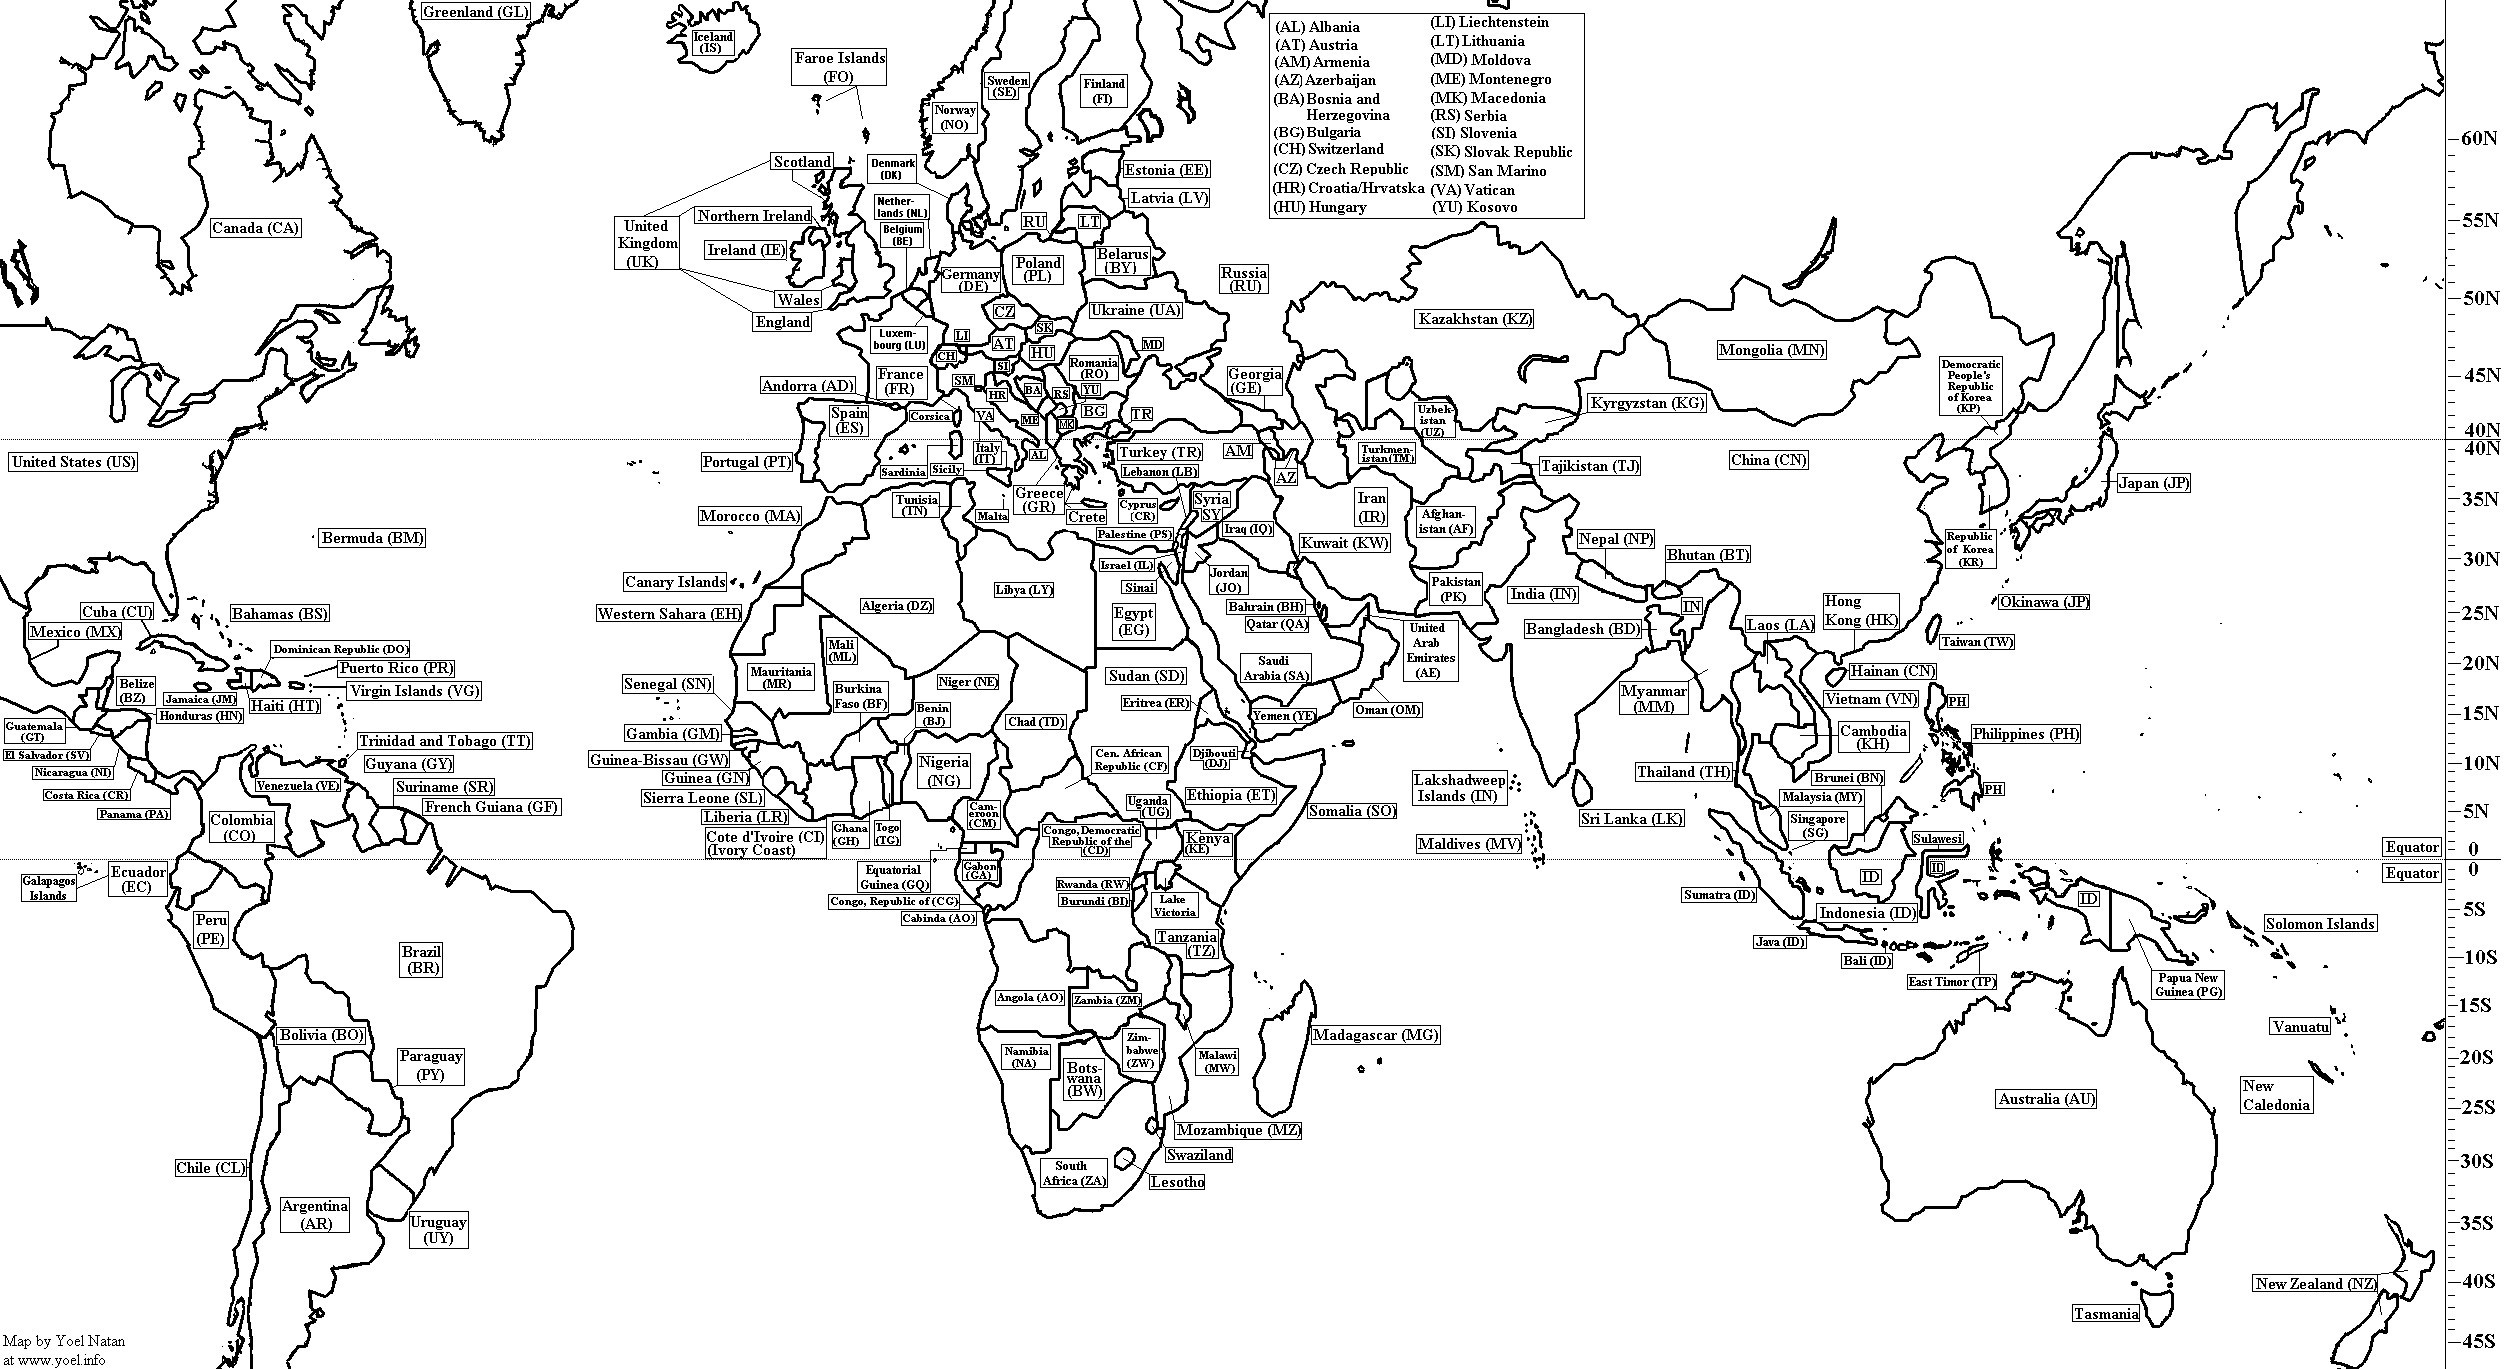 Countries Coloring Pages World Map Coloring Pages For Page 1 World Wide Maps